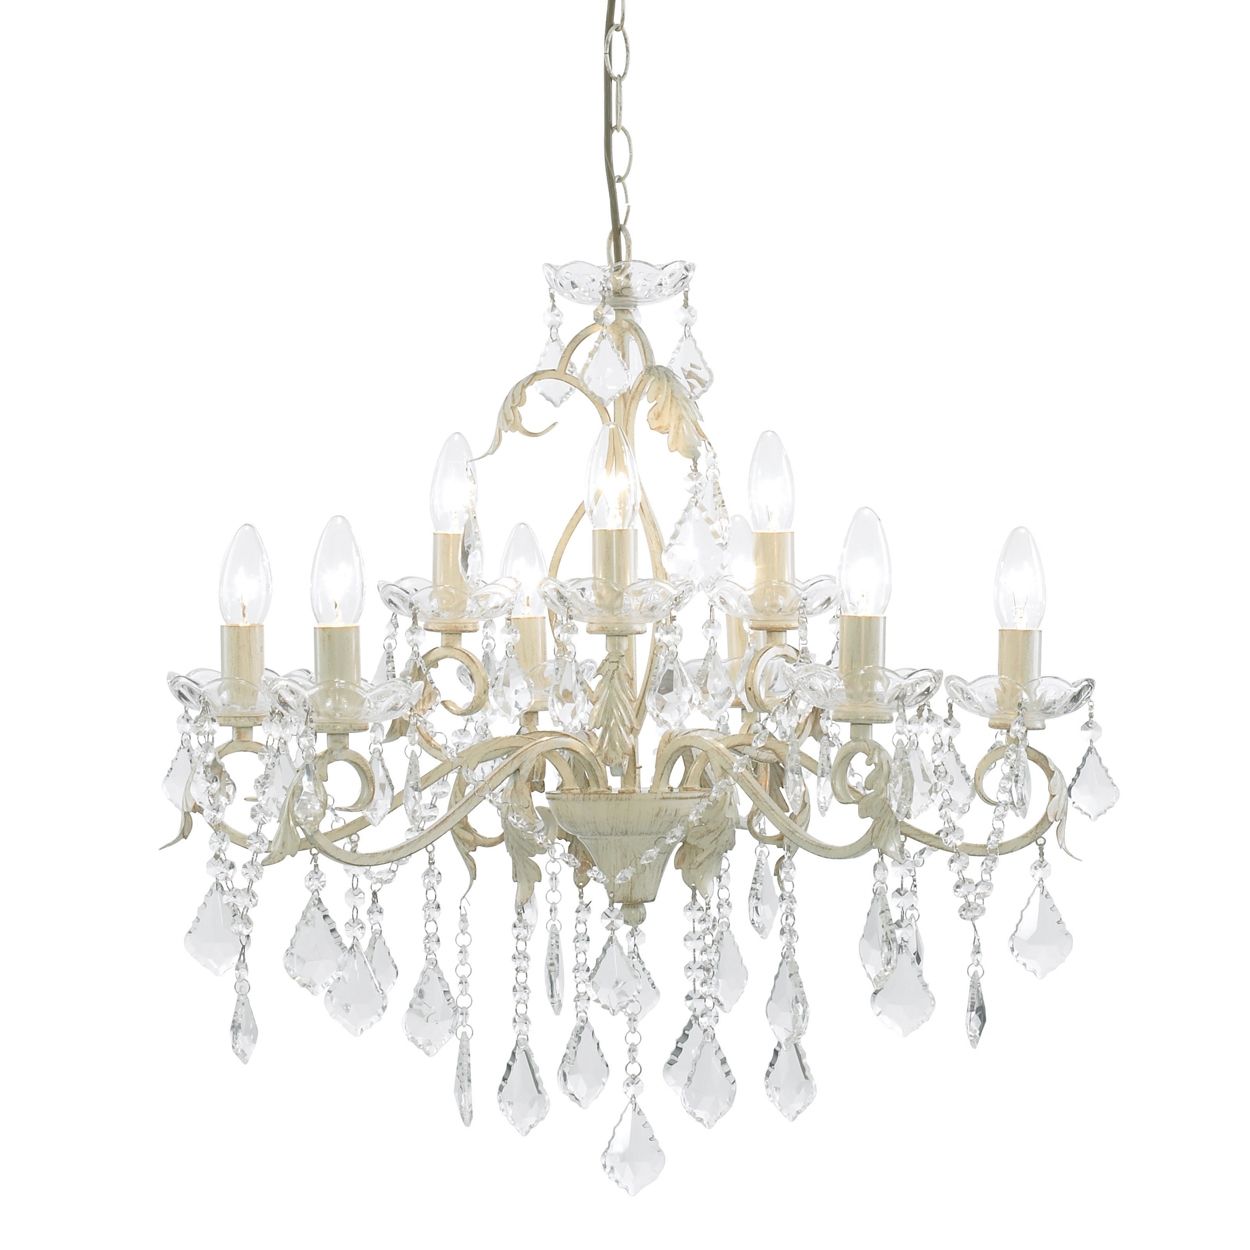 Awesome Crystal Chandelier Design Ideas And Decor Intended For Cream Gold Chandelier (View 2 of 12)